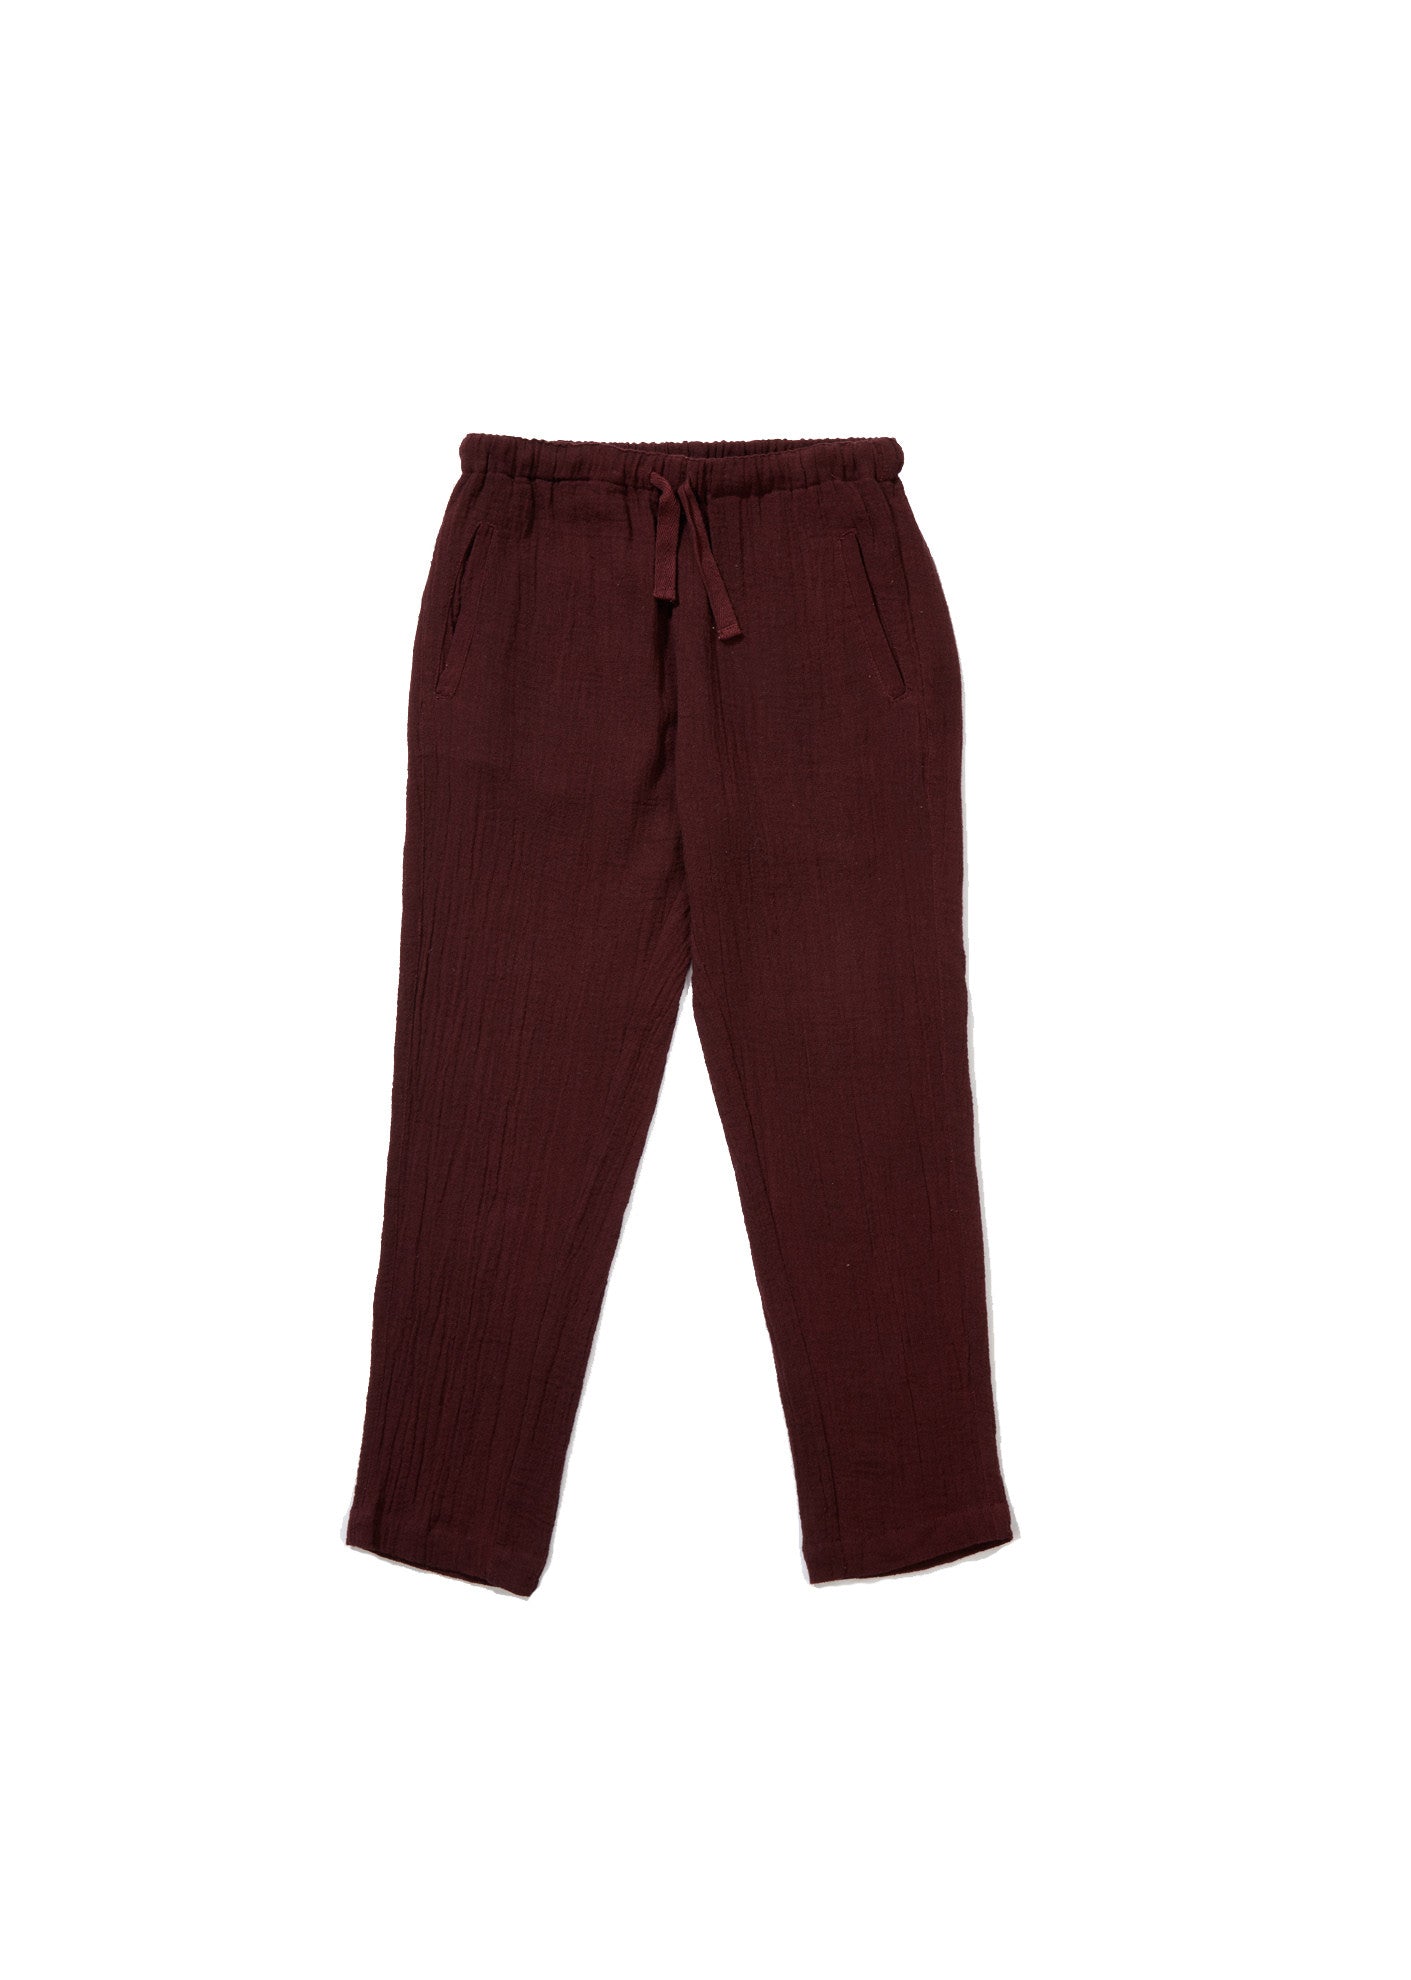 Boys Brick Red Cotton Trousers